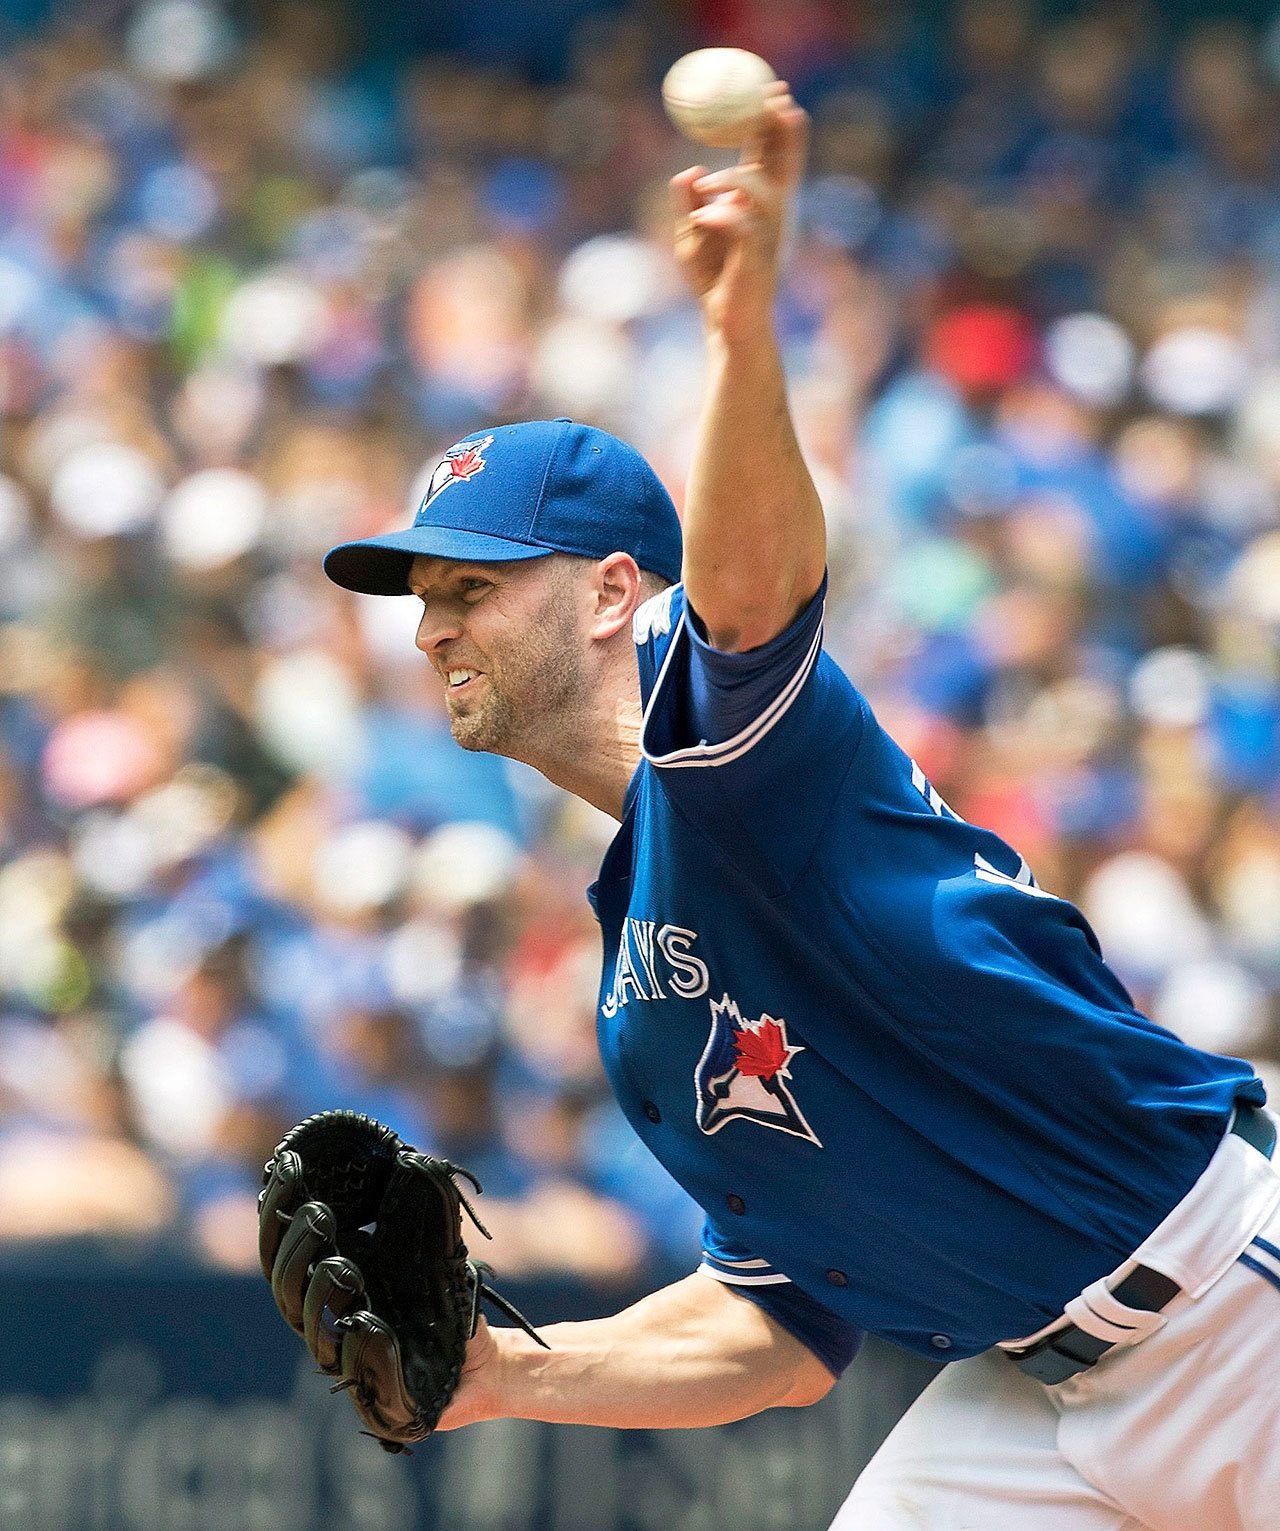 Toronto Blue Jays starting pitcher J.A. Happ allowed just one hit Sunday as he picked his 13th win of the season. (Fred Thornhill/The Canadian Press via AP)